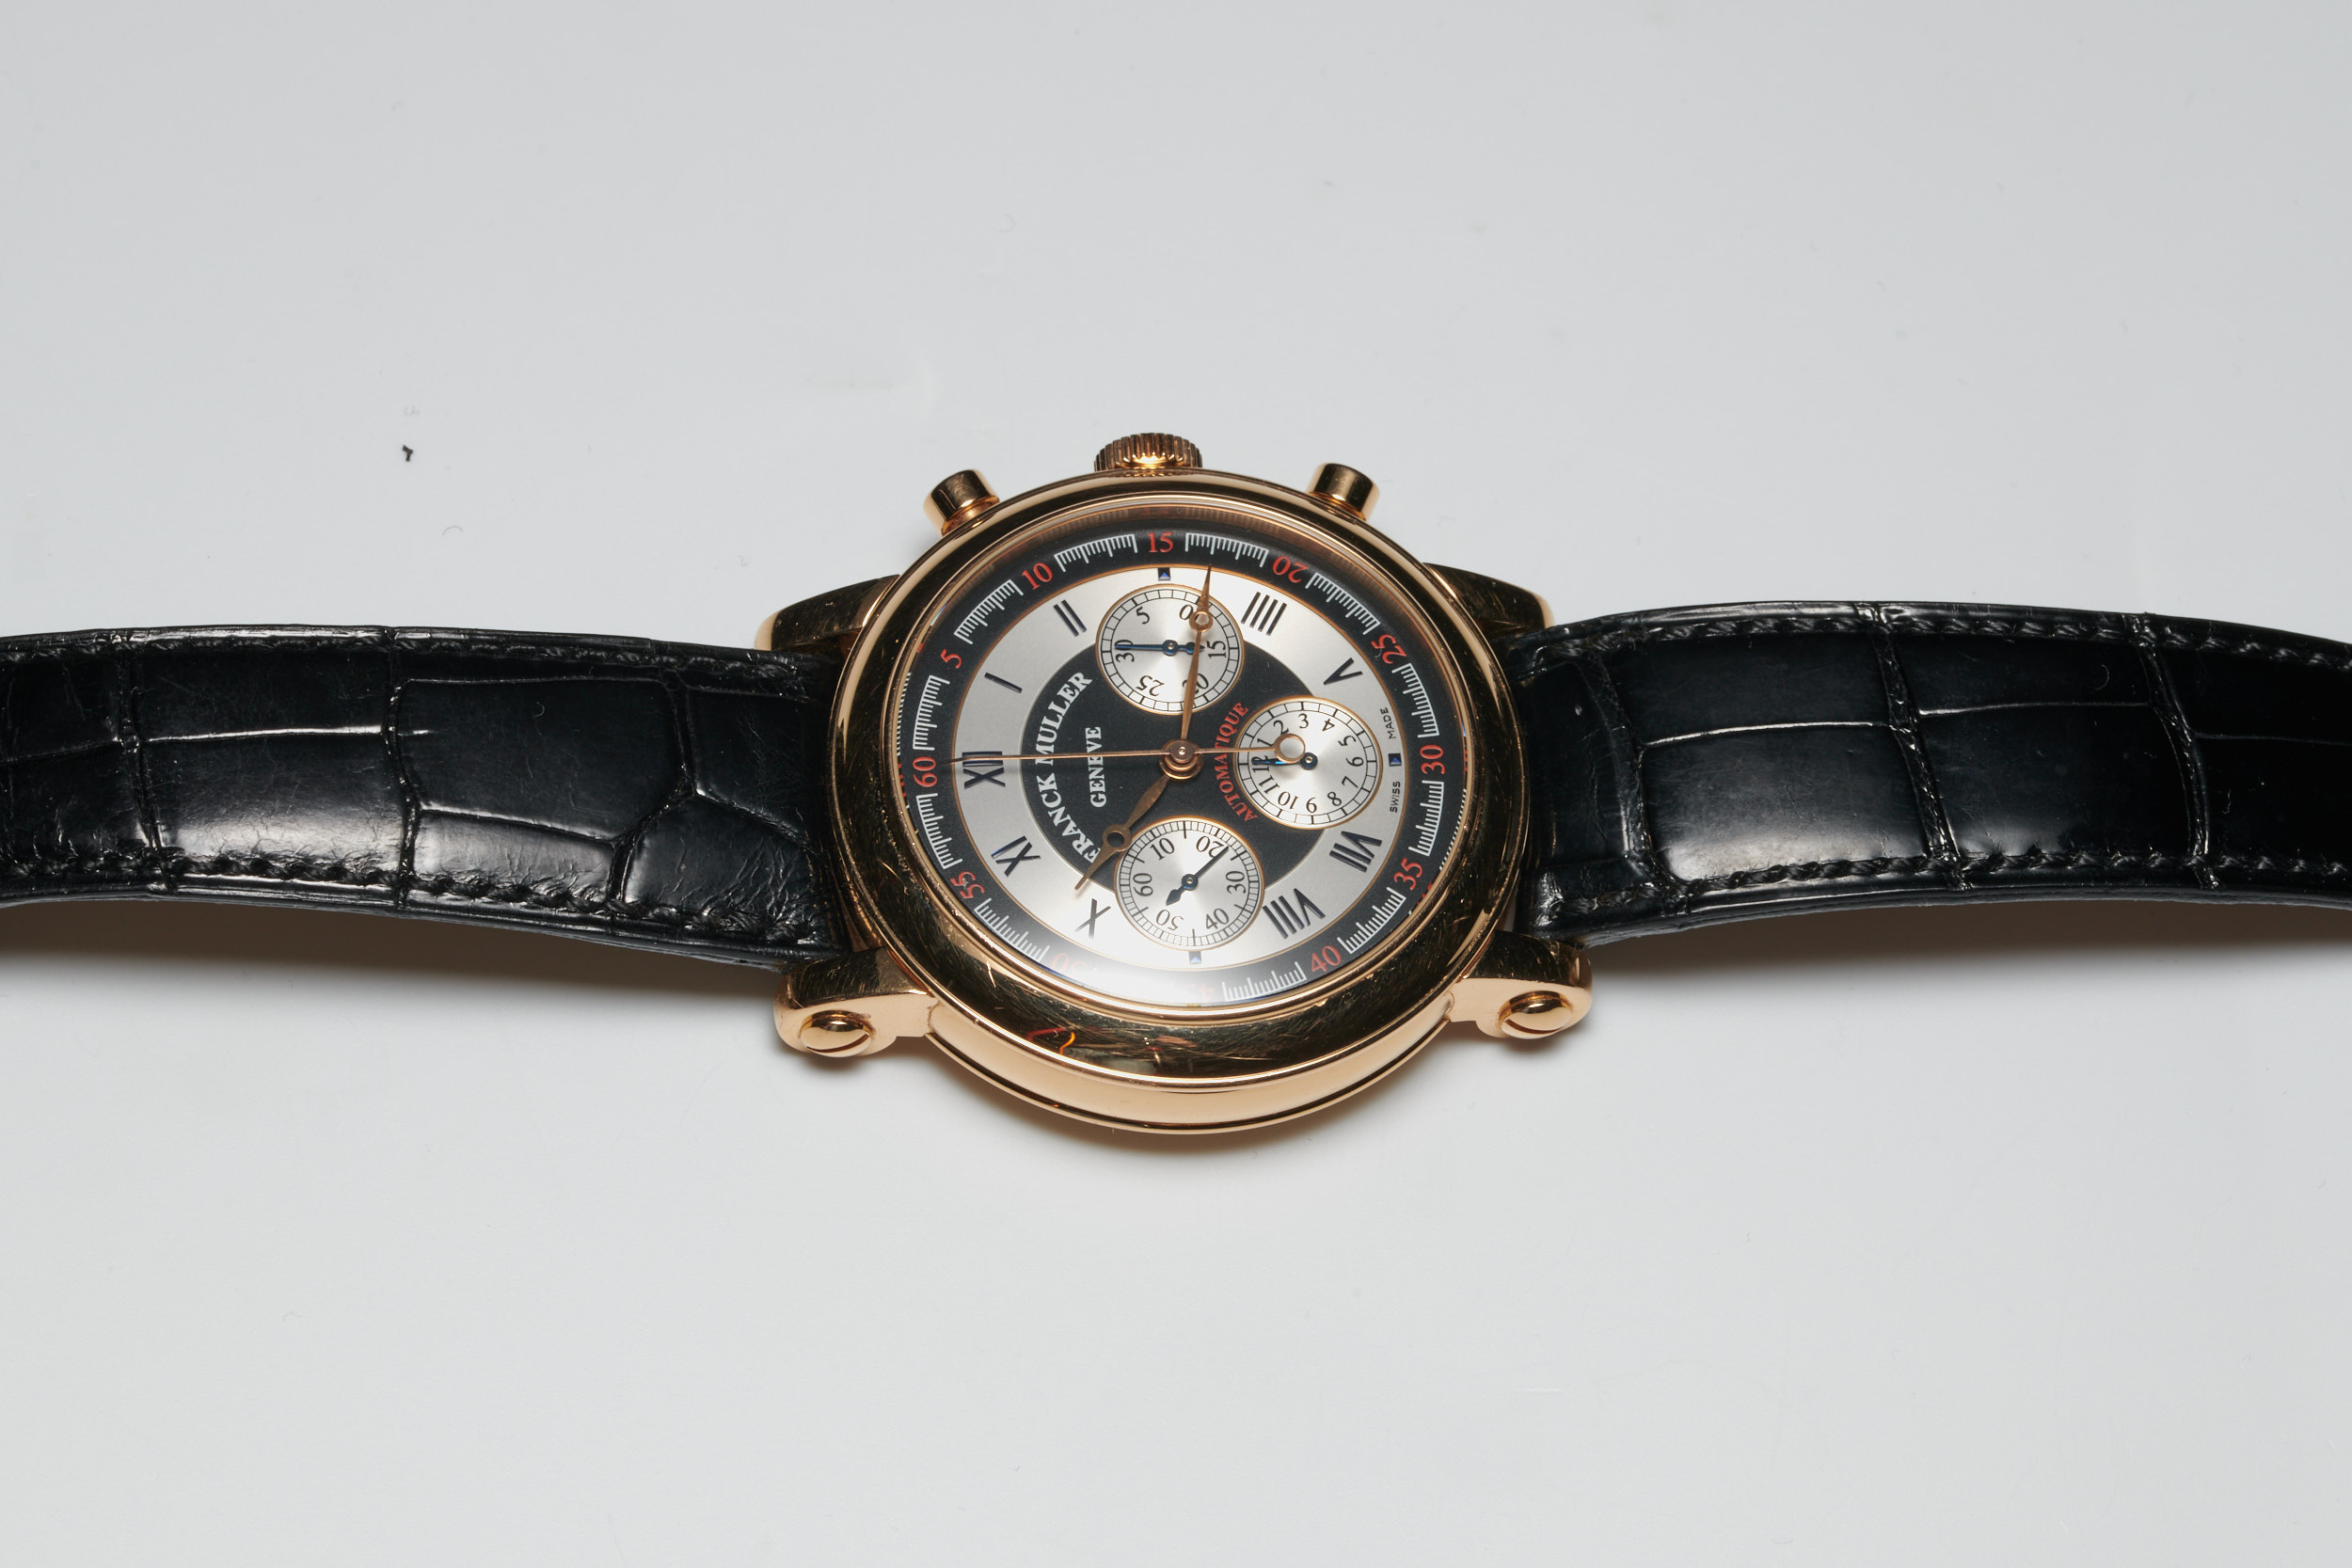 Ineichen Auctioneers - Chronograph and Pulsometer